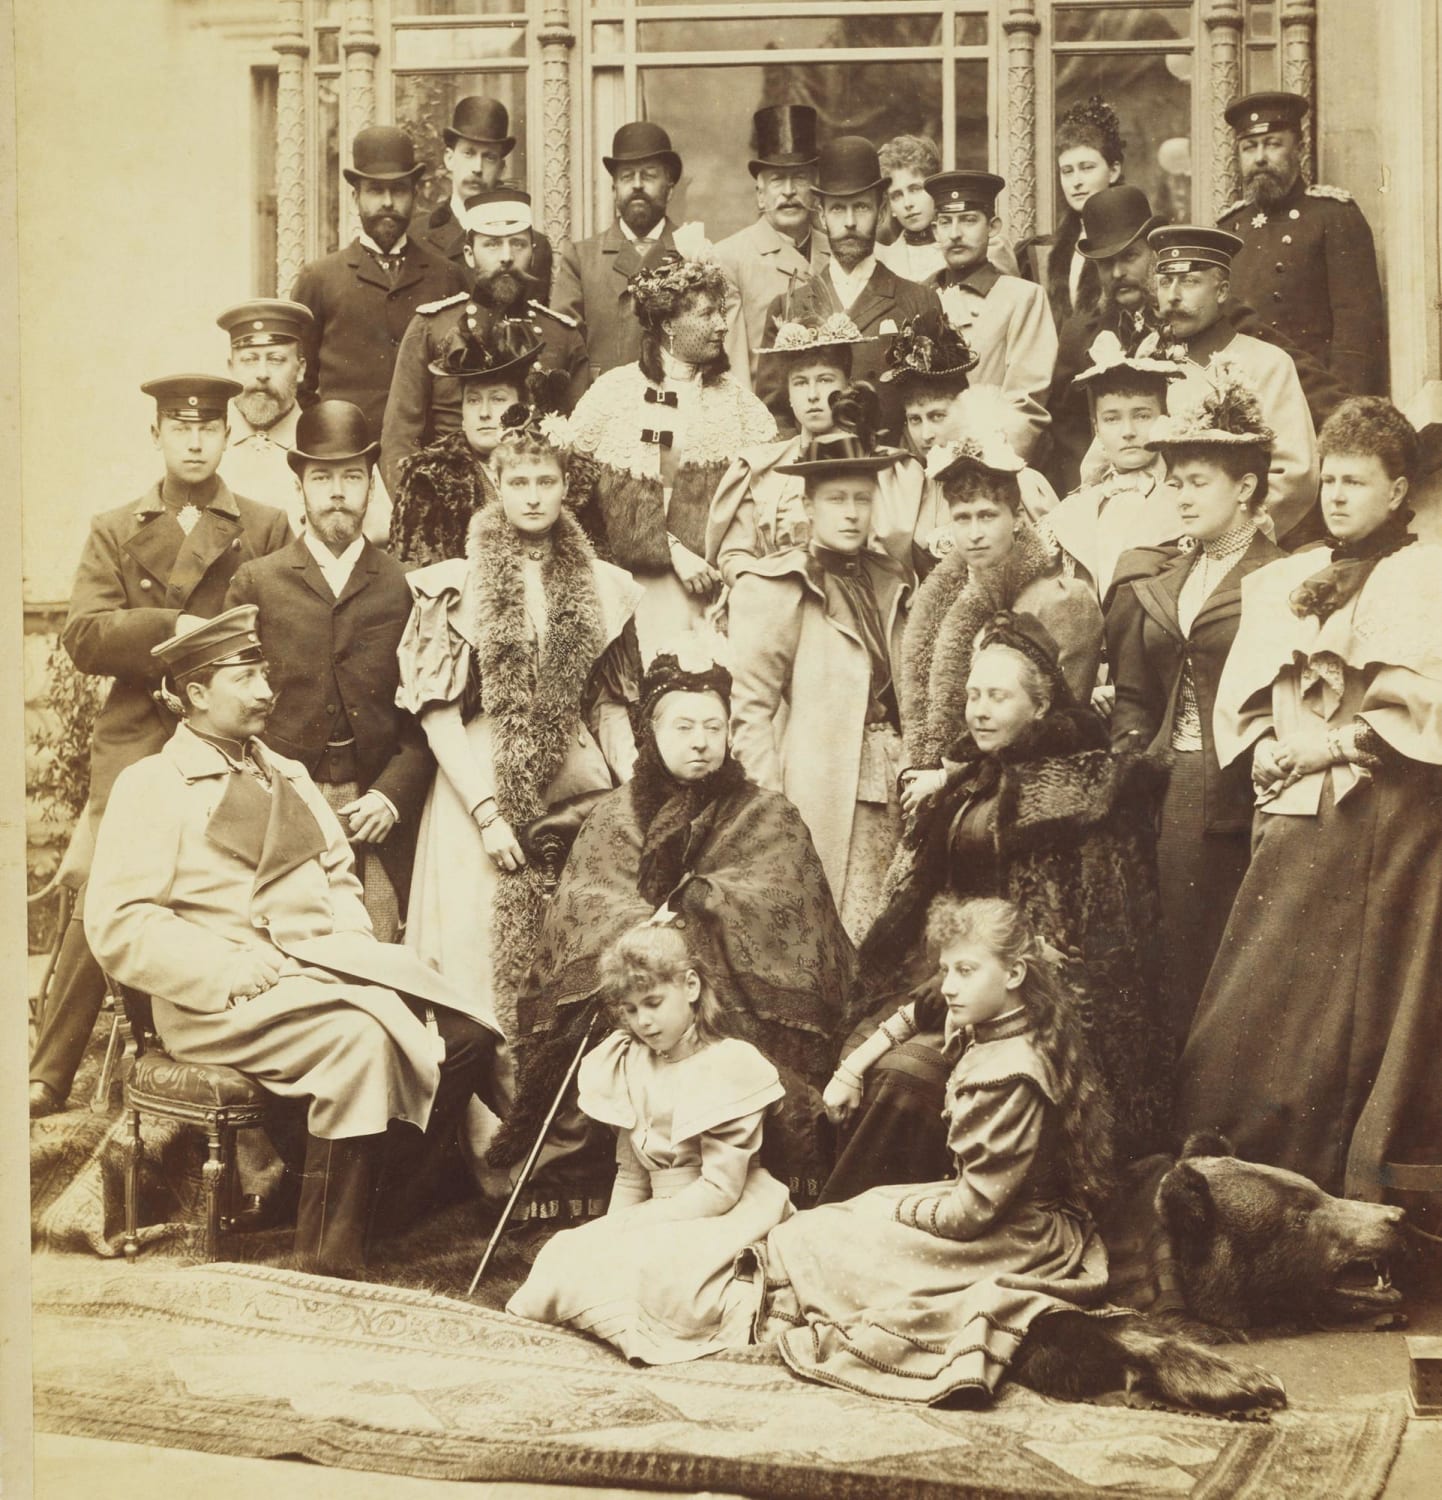 Queen Victoria, the "grandmother of Europe", with Kaiser Wilhelm II, Tsar Nicholas II, and future King Edward VII in one large royal family snapshot, 1894 .